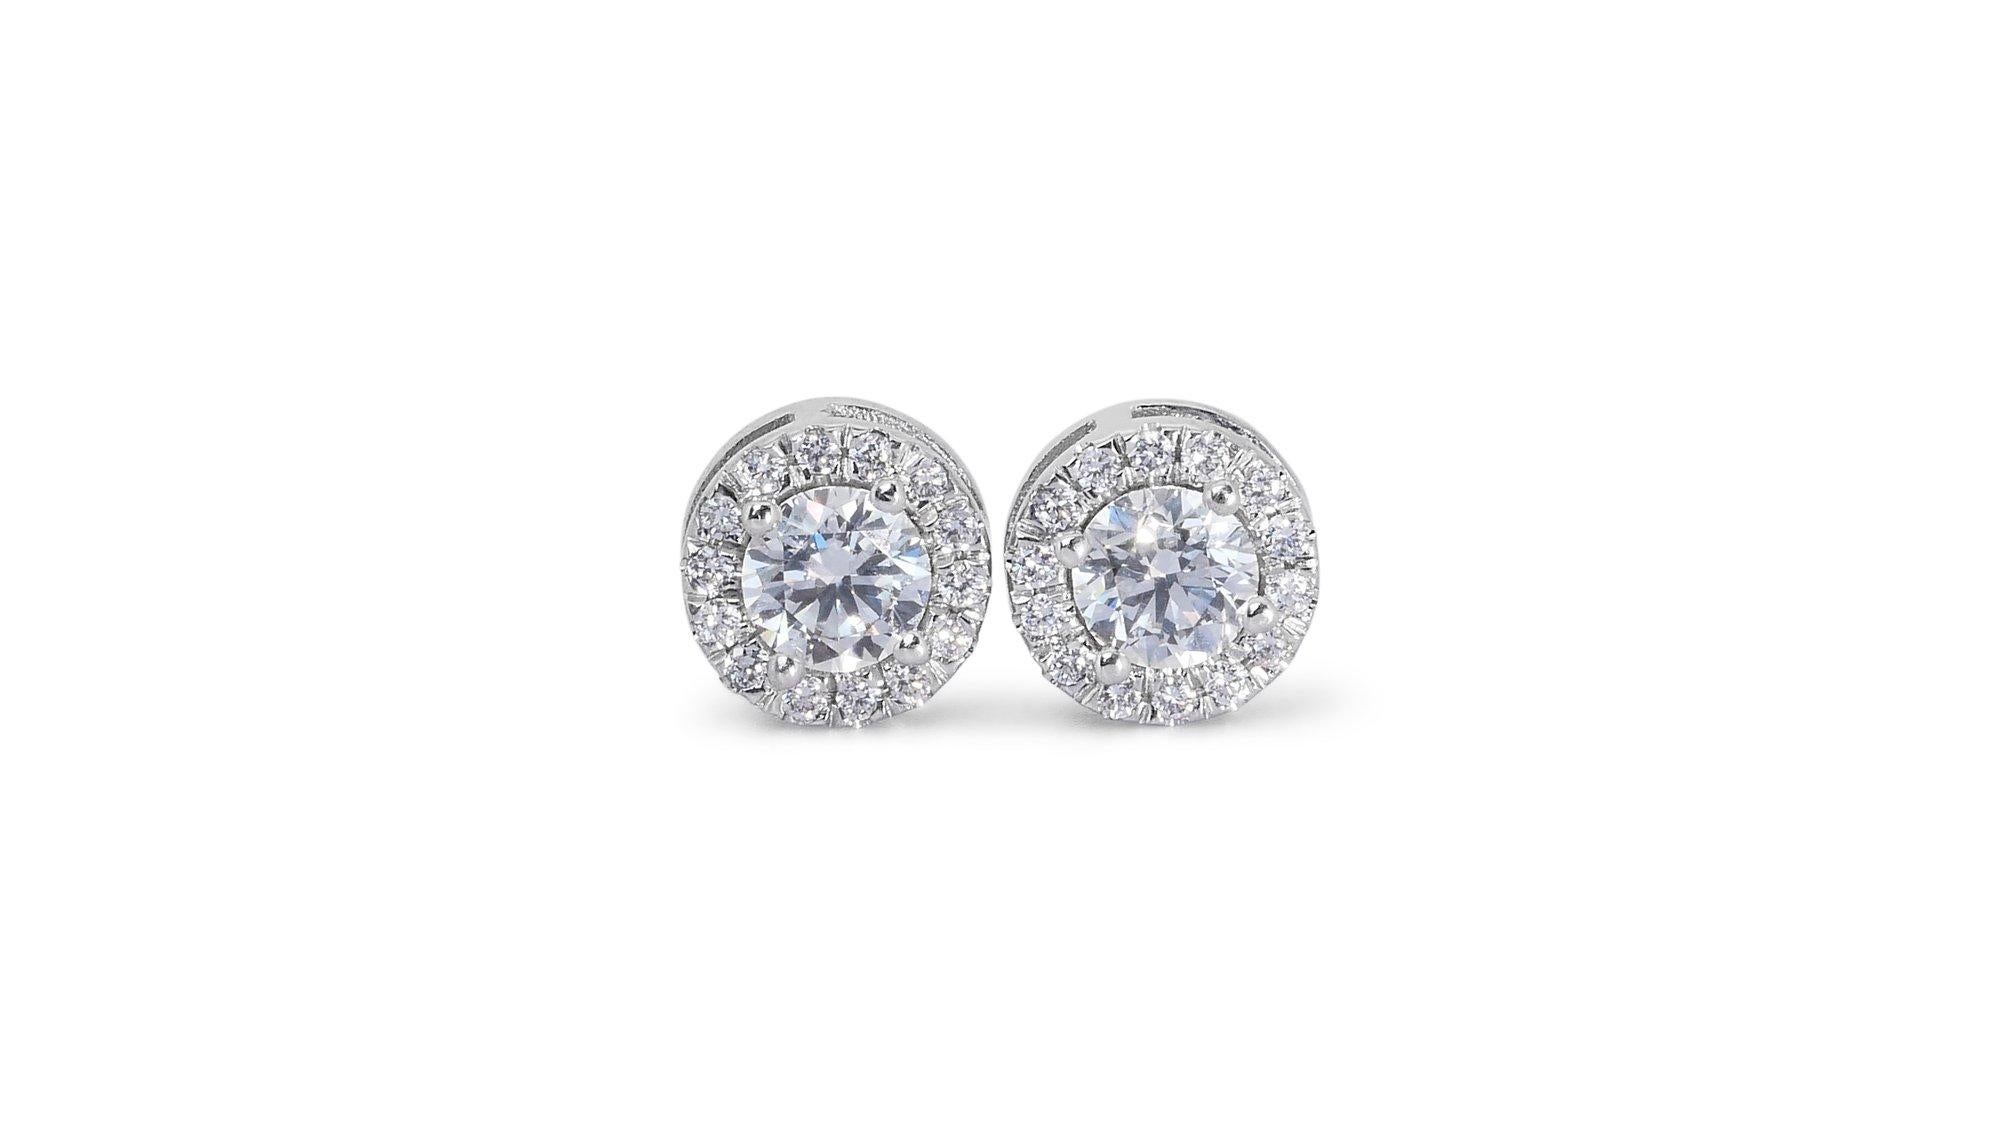 Dazzling 1.65ct Diamond Halo Stud Earrings in 18k White Gold - GIA Certified For Sale 4